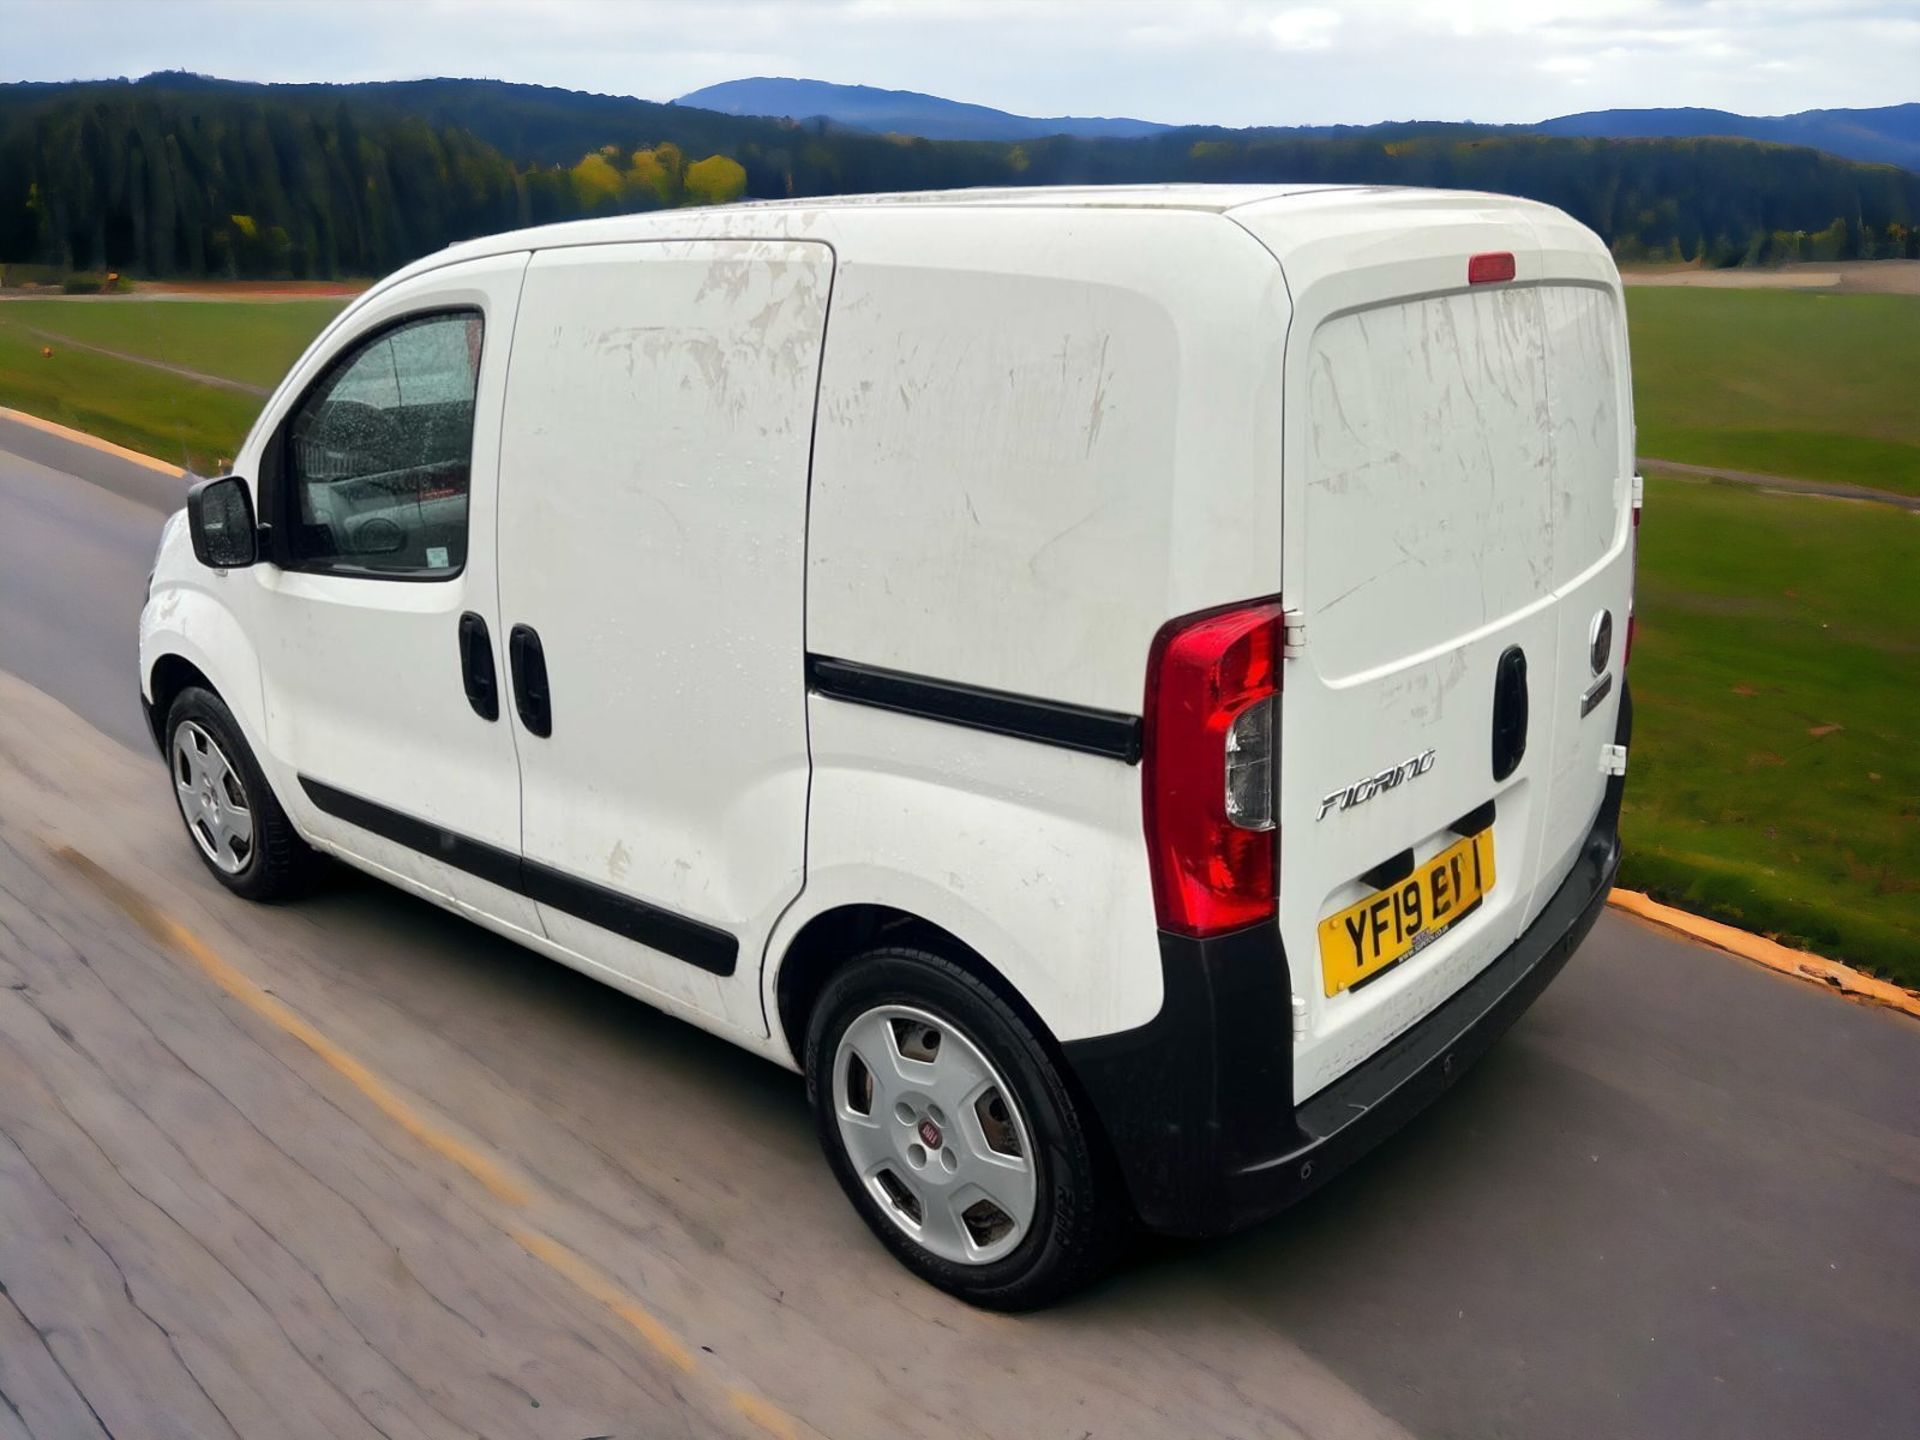 **SPARES OR REAPIRS** 2019 FIAT FIORINO SX 1.3 HDI VAN - YOUR RELIABLE BUSINESS COMPANION - Image 3 of 11